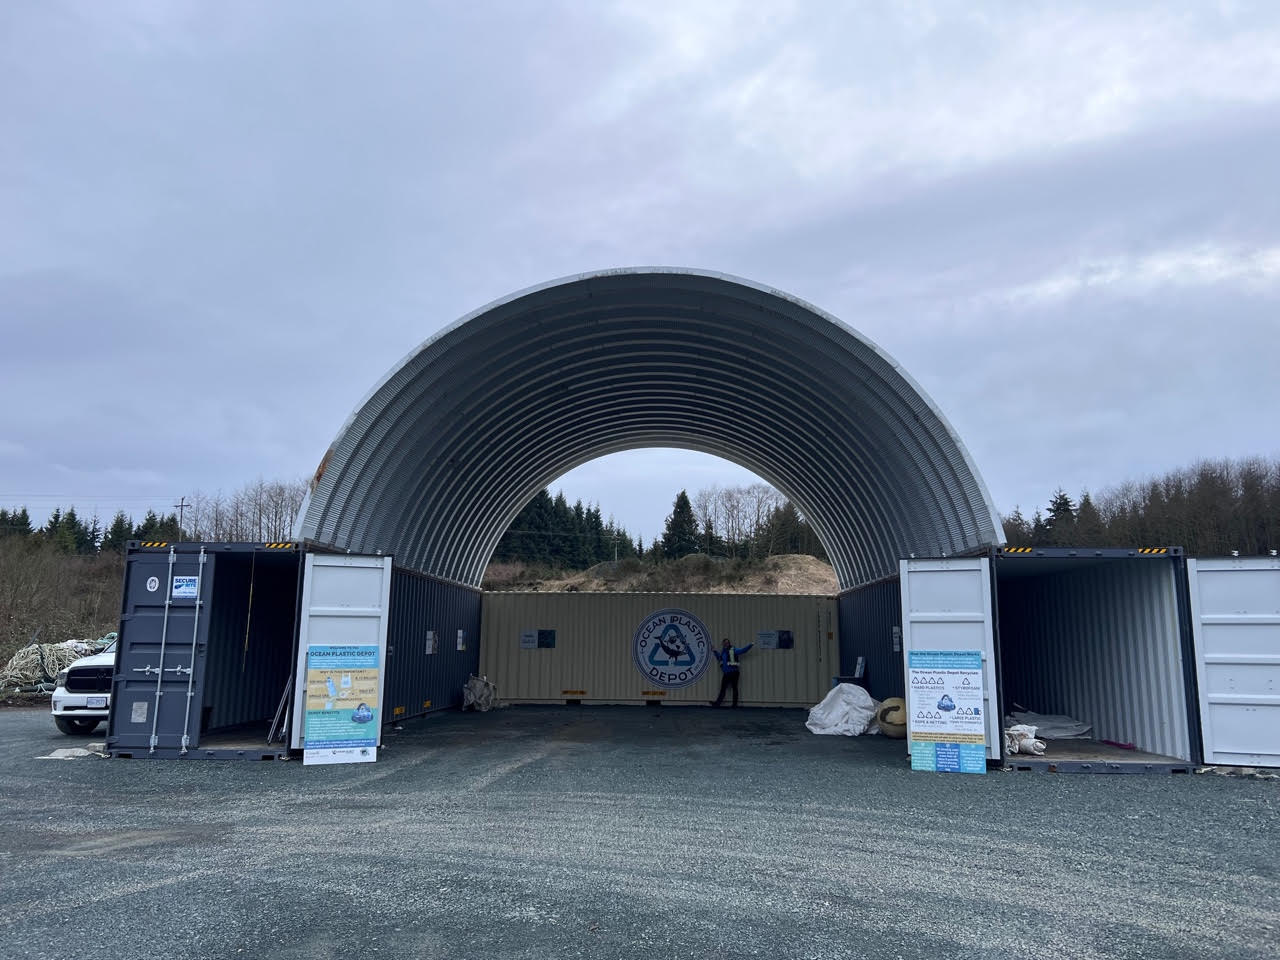 There’s a brand new ocean plastic recycling depot on Vancouver Island